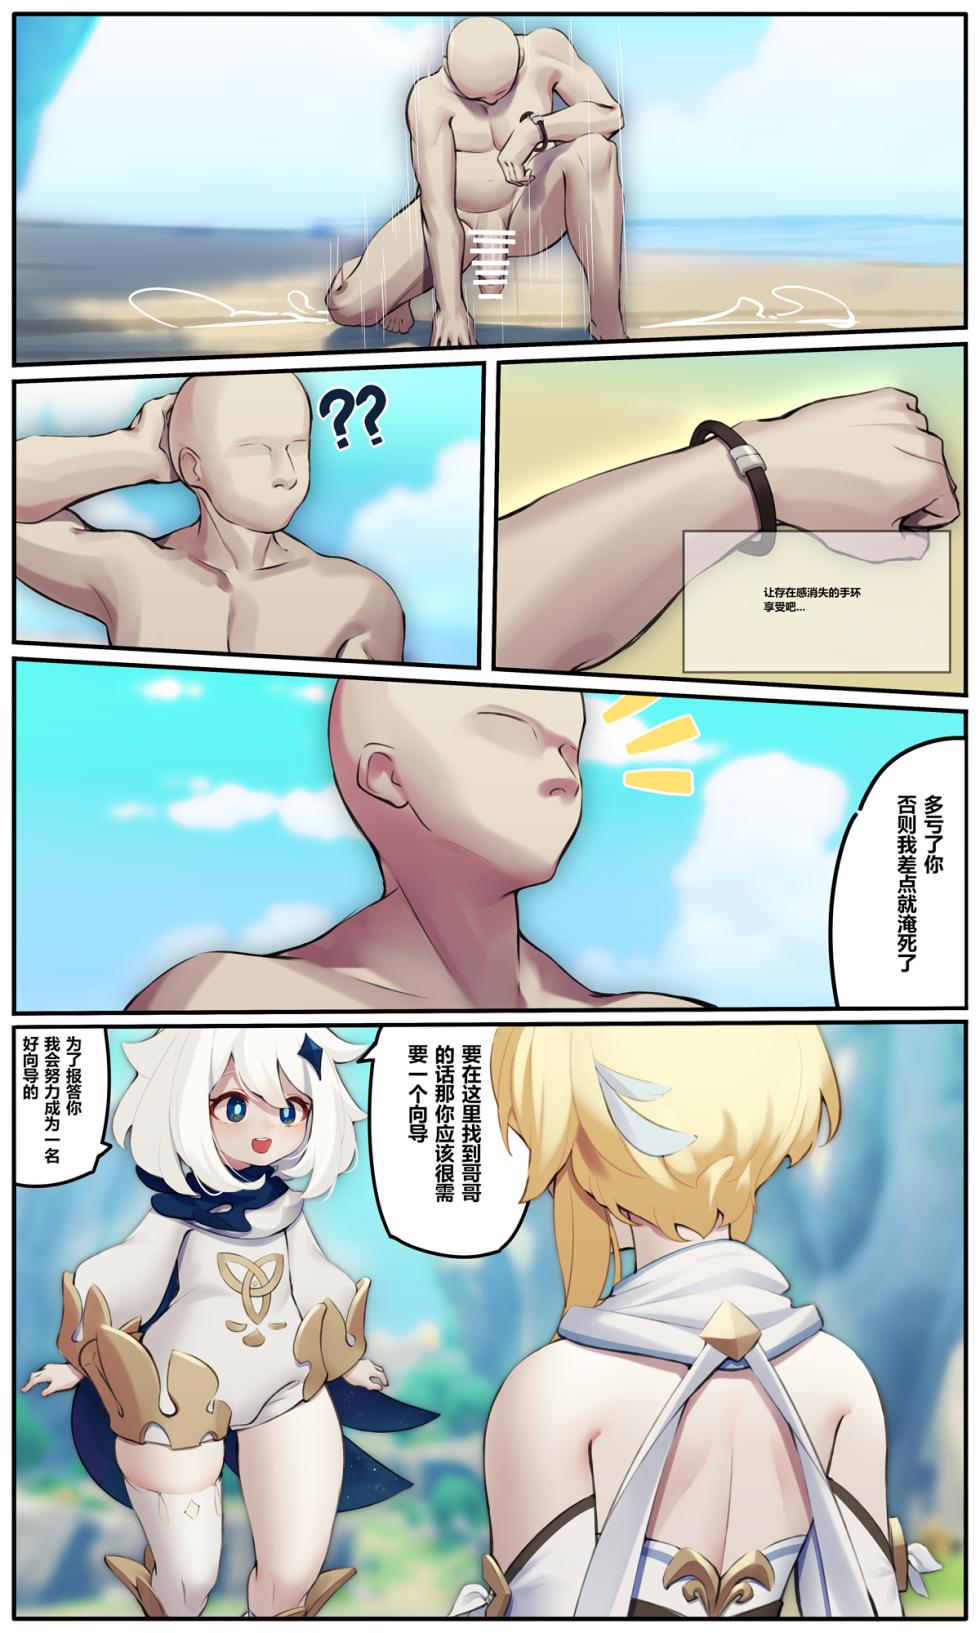 [Azure Ghost] Gadgets θ 01 (Genshin Impact) [Chinese] - Page 6